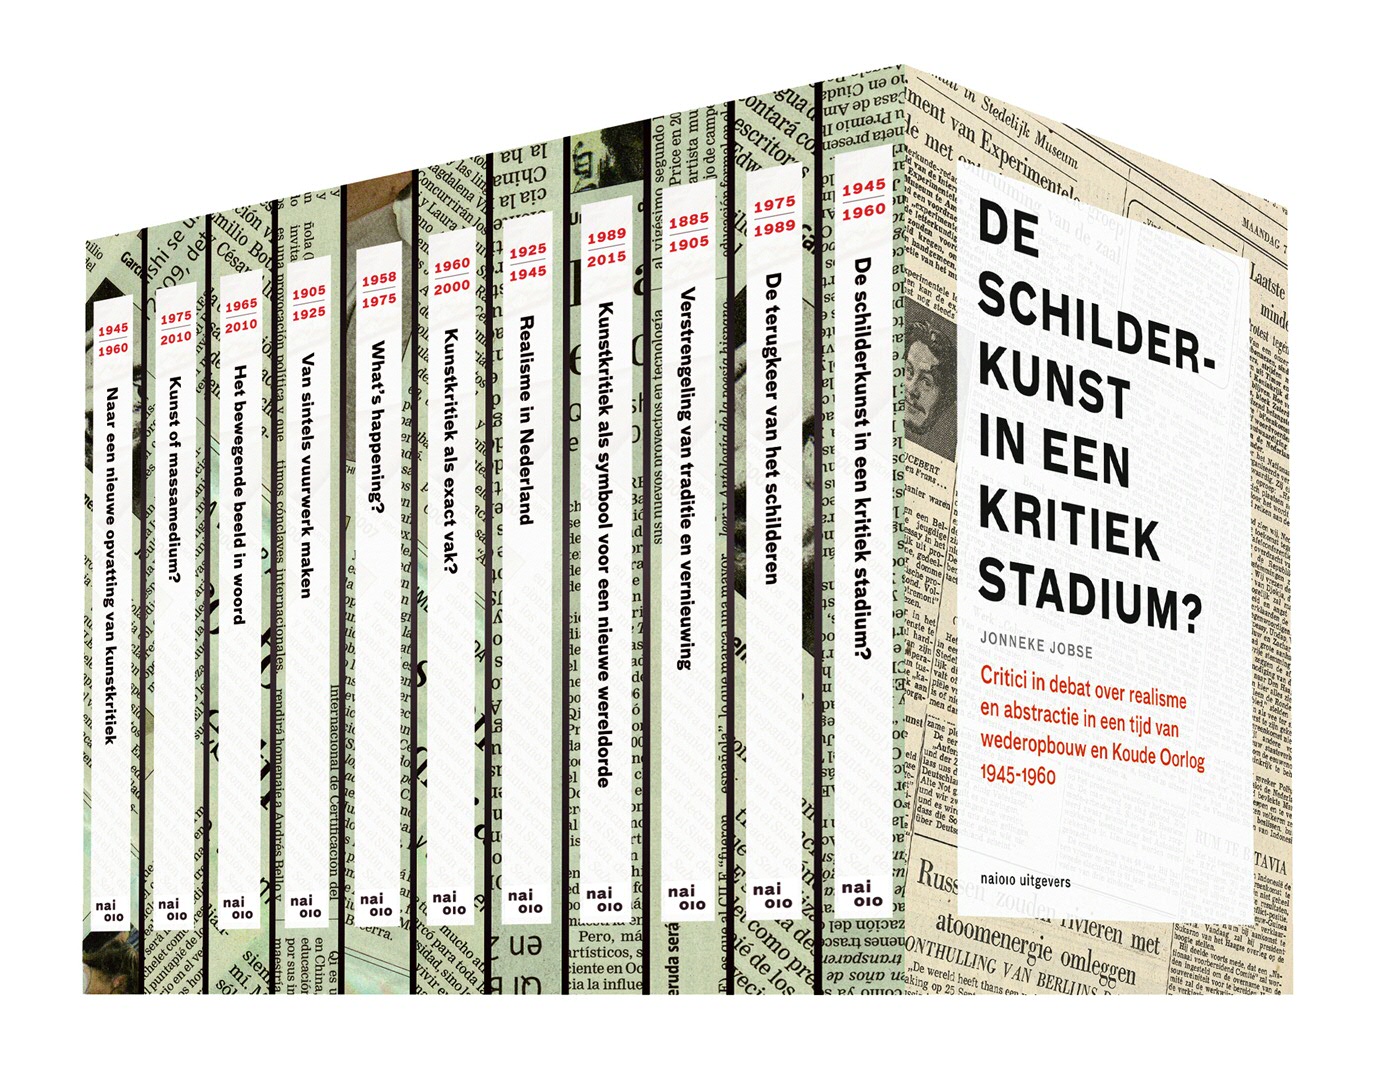 The series Art Criticism in the Netherlands 1885-2015 (11 parts)The series Art Criticism in the Netherlands 1885-2015 (11 parts)